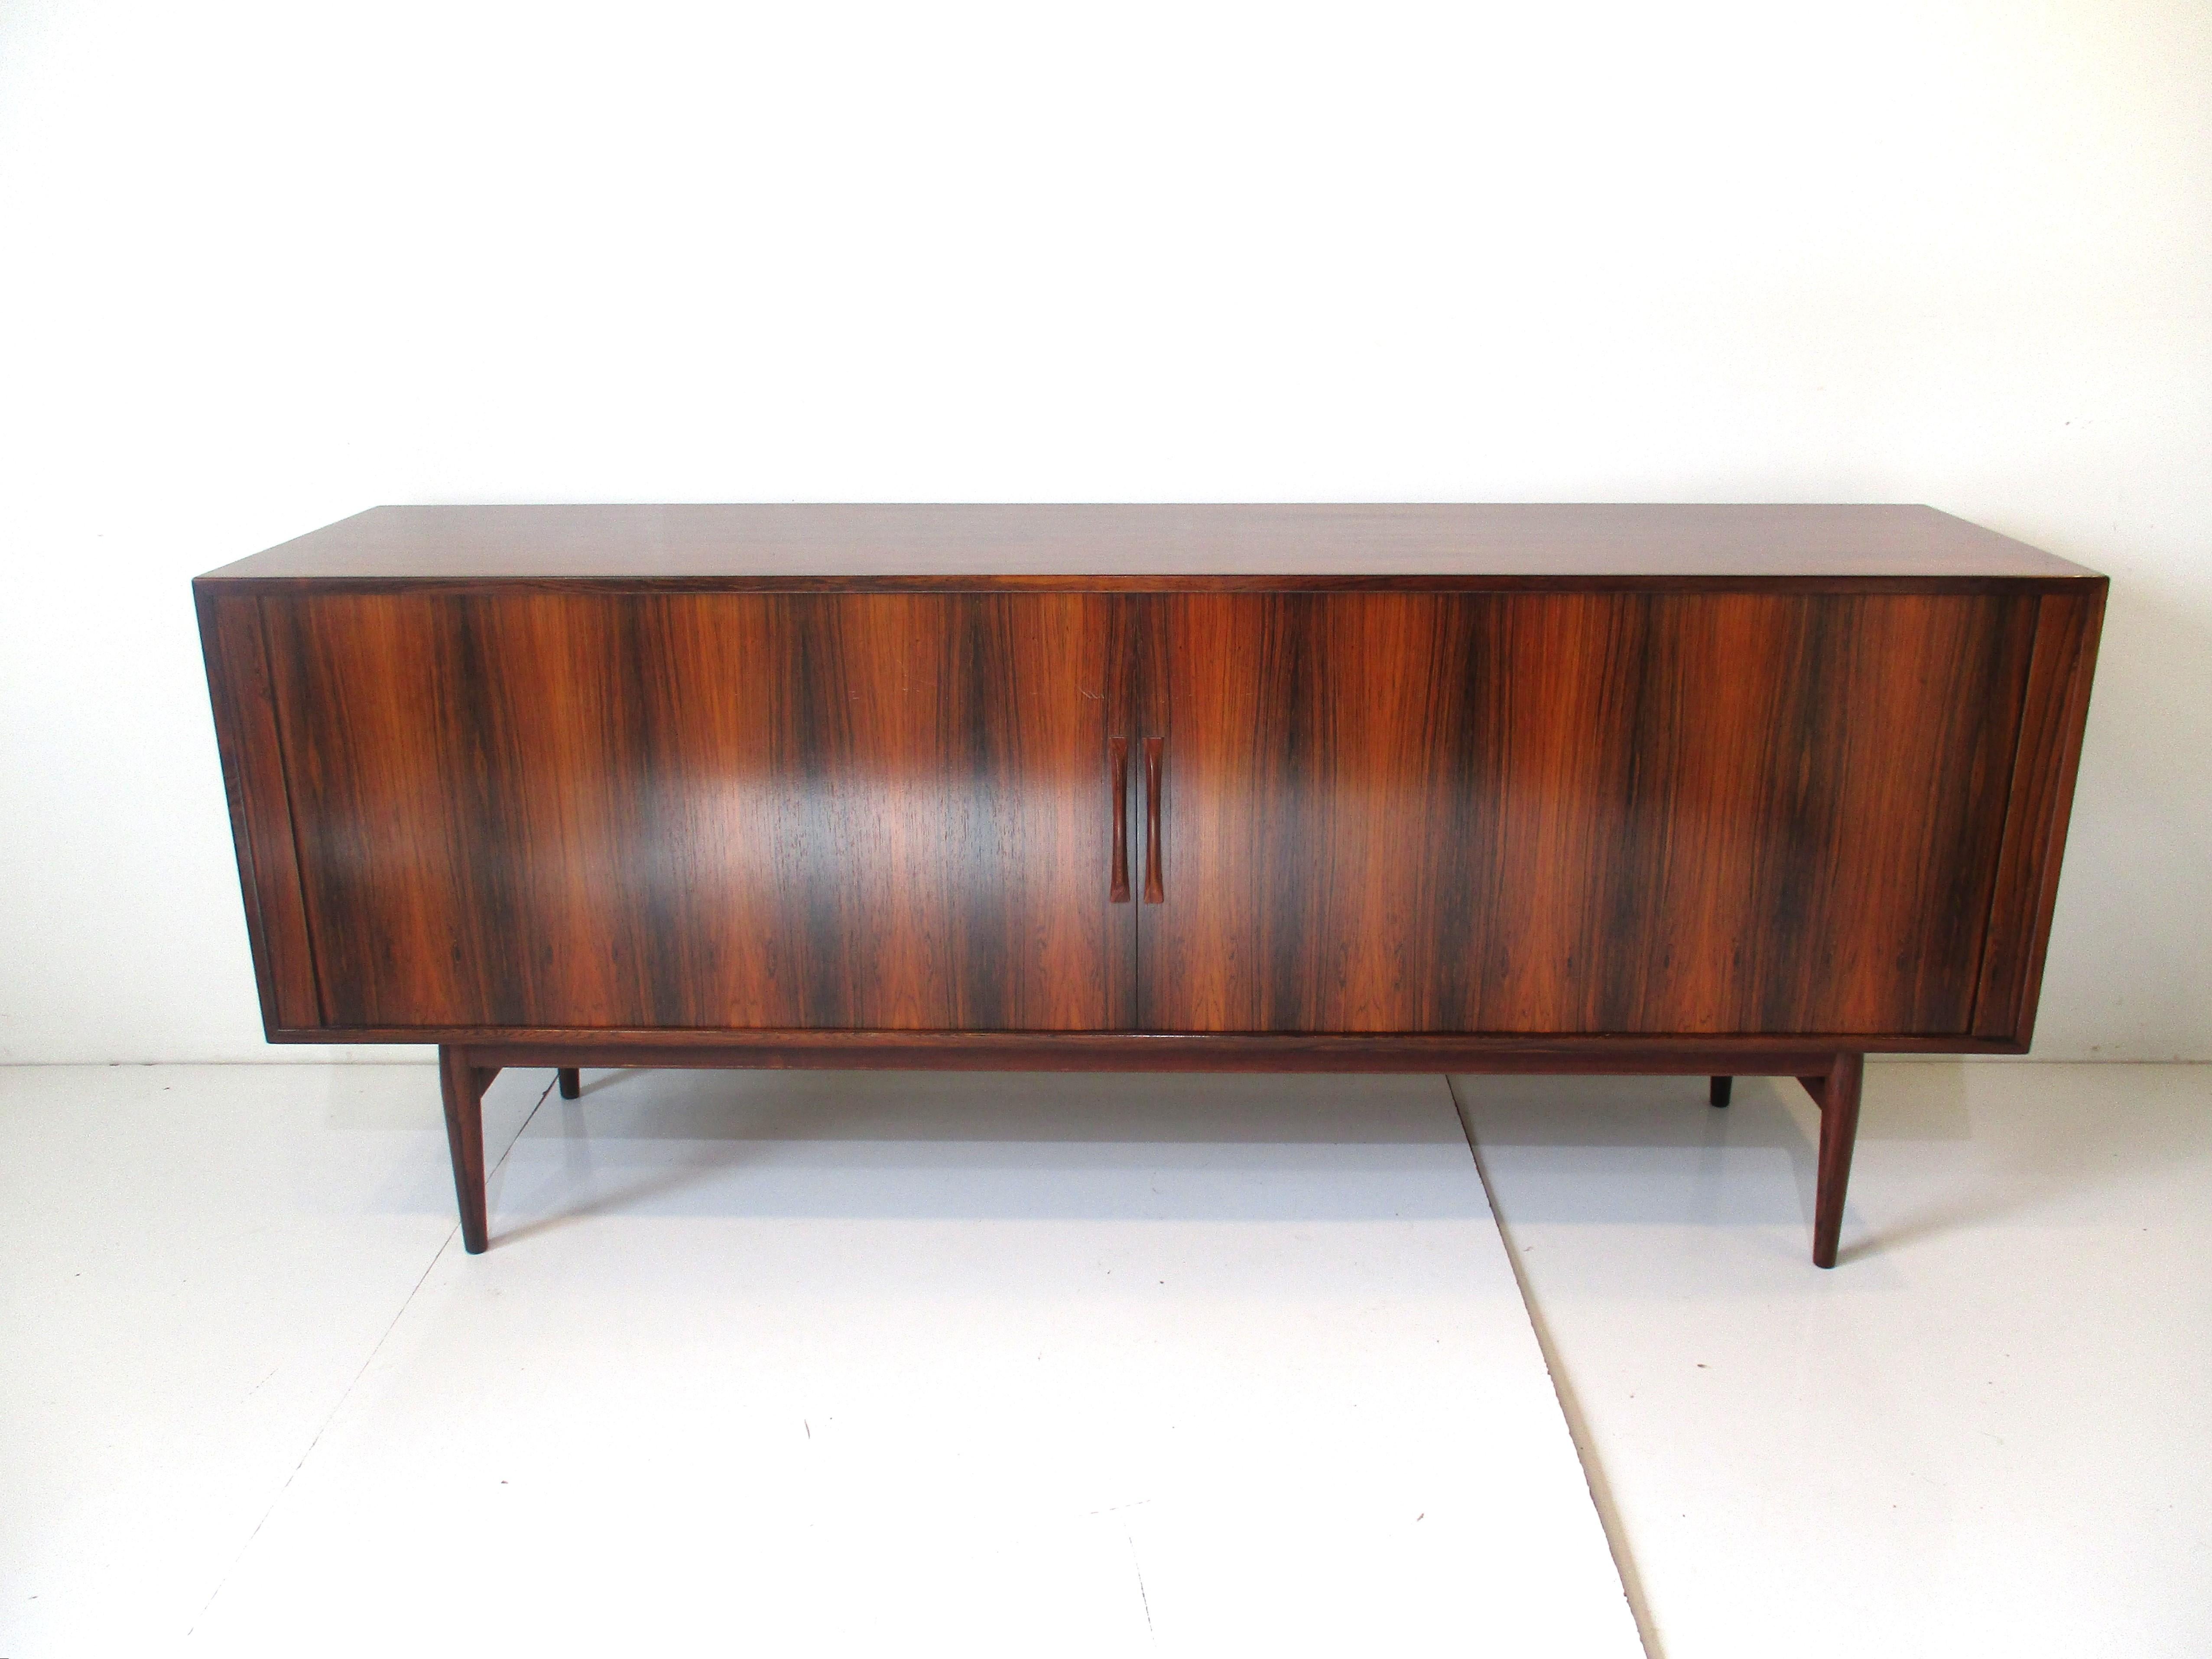 A very well crafted and designed Brazilian rosewood credenza / sideboard with wonderful book matched grained tambour door front . Ajustable shelves to the left, right and center of the piece with two small drawers to the middle section giving you